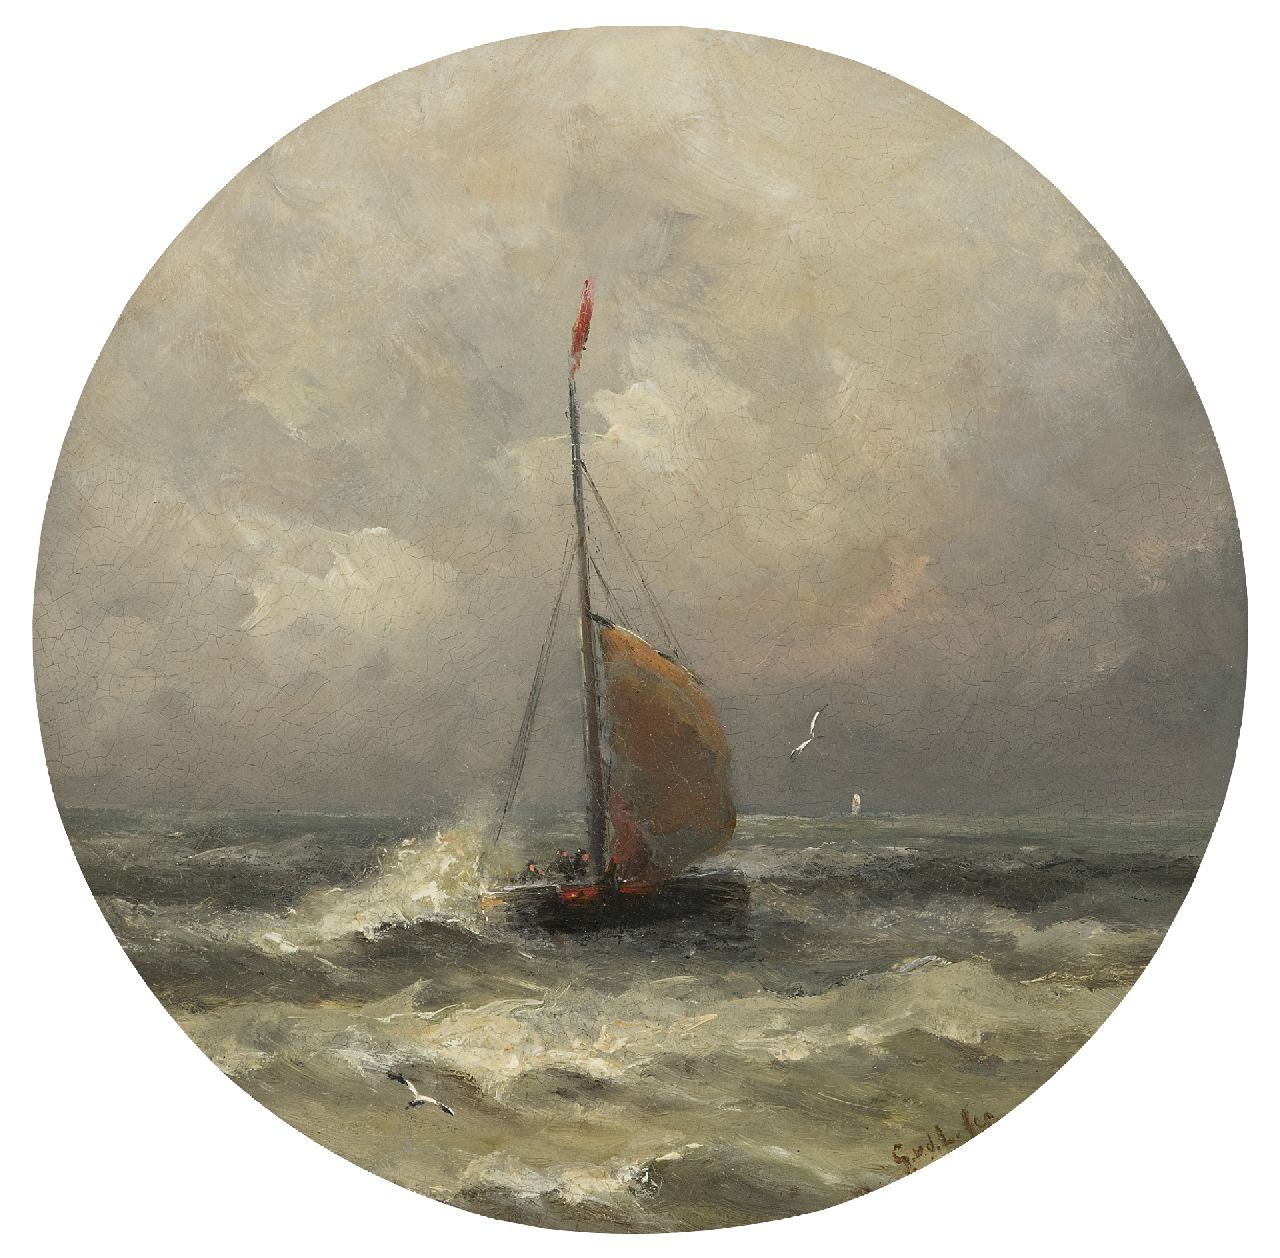 Laan G. van der | Gerard van der Laan | Paintings offered for sale | Arriving fishing bark, oil on china 28.3 x 28.3 cm, signed l.r. with initials